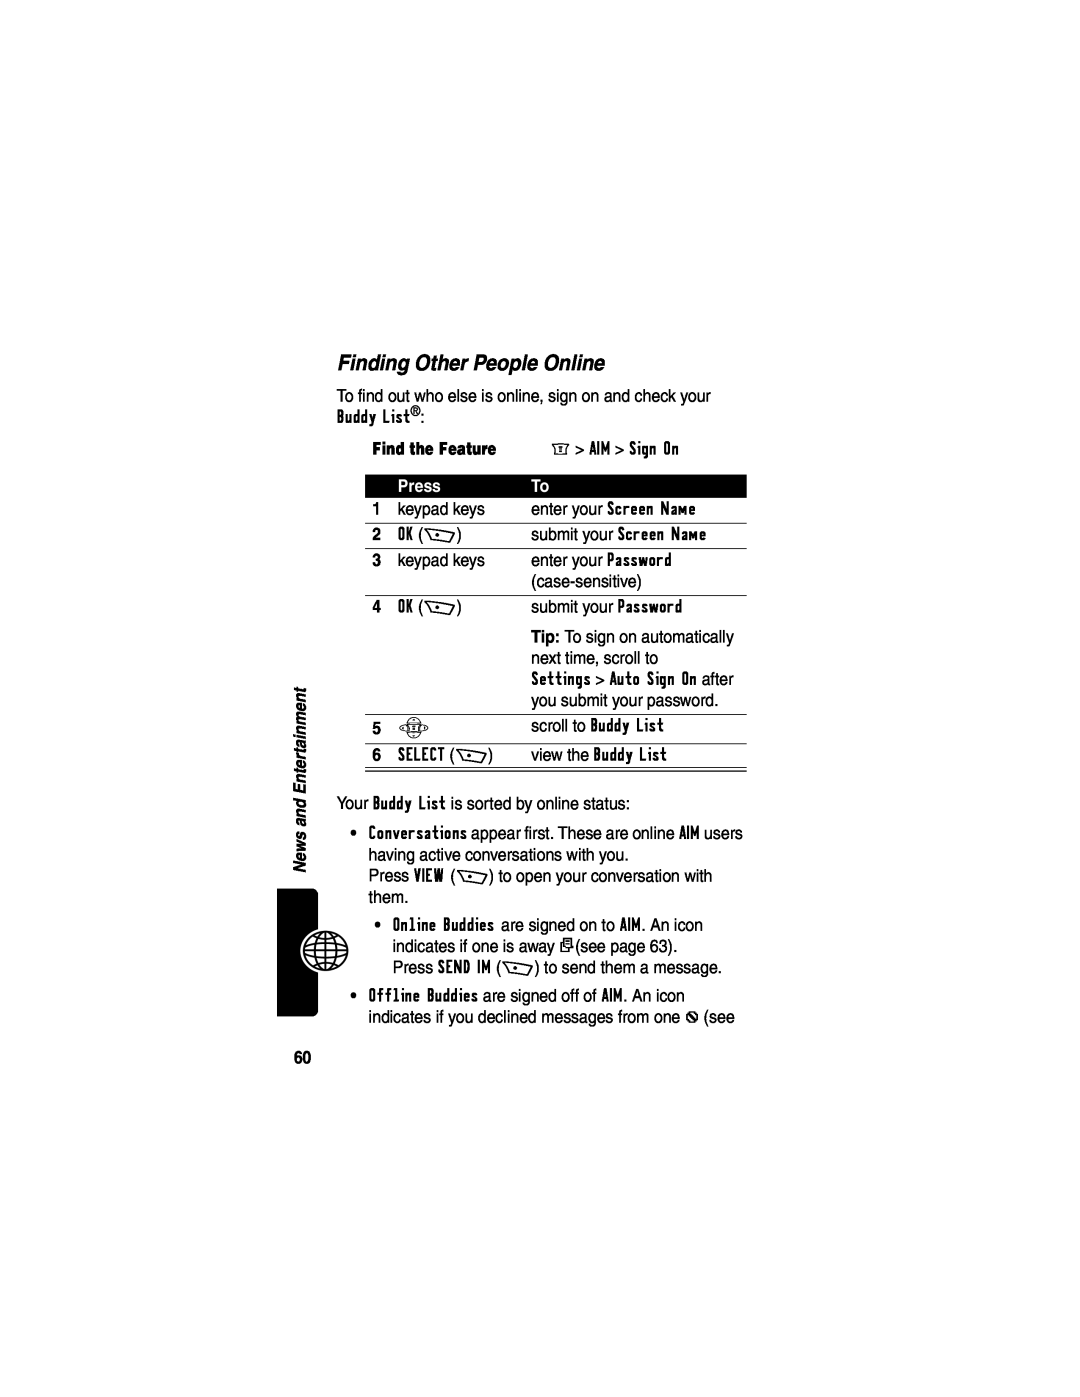 Motorola WIRELESS TELEPHONE manual Finding Other People Online, Find the Feature, Press 